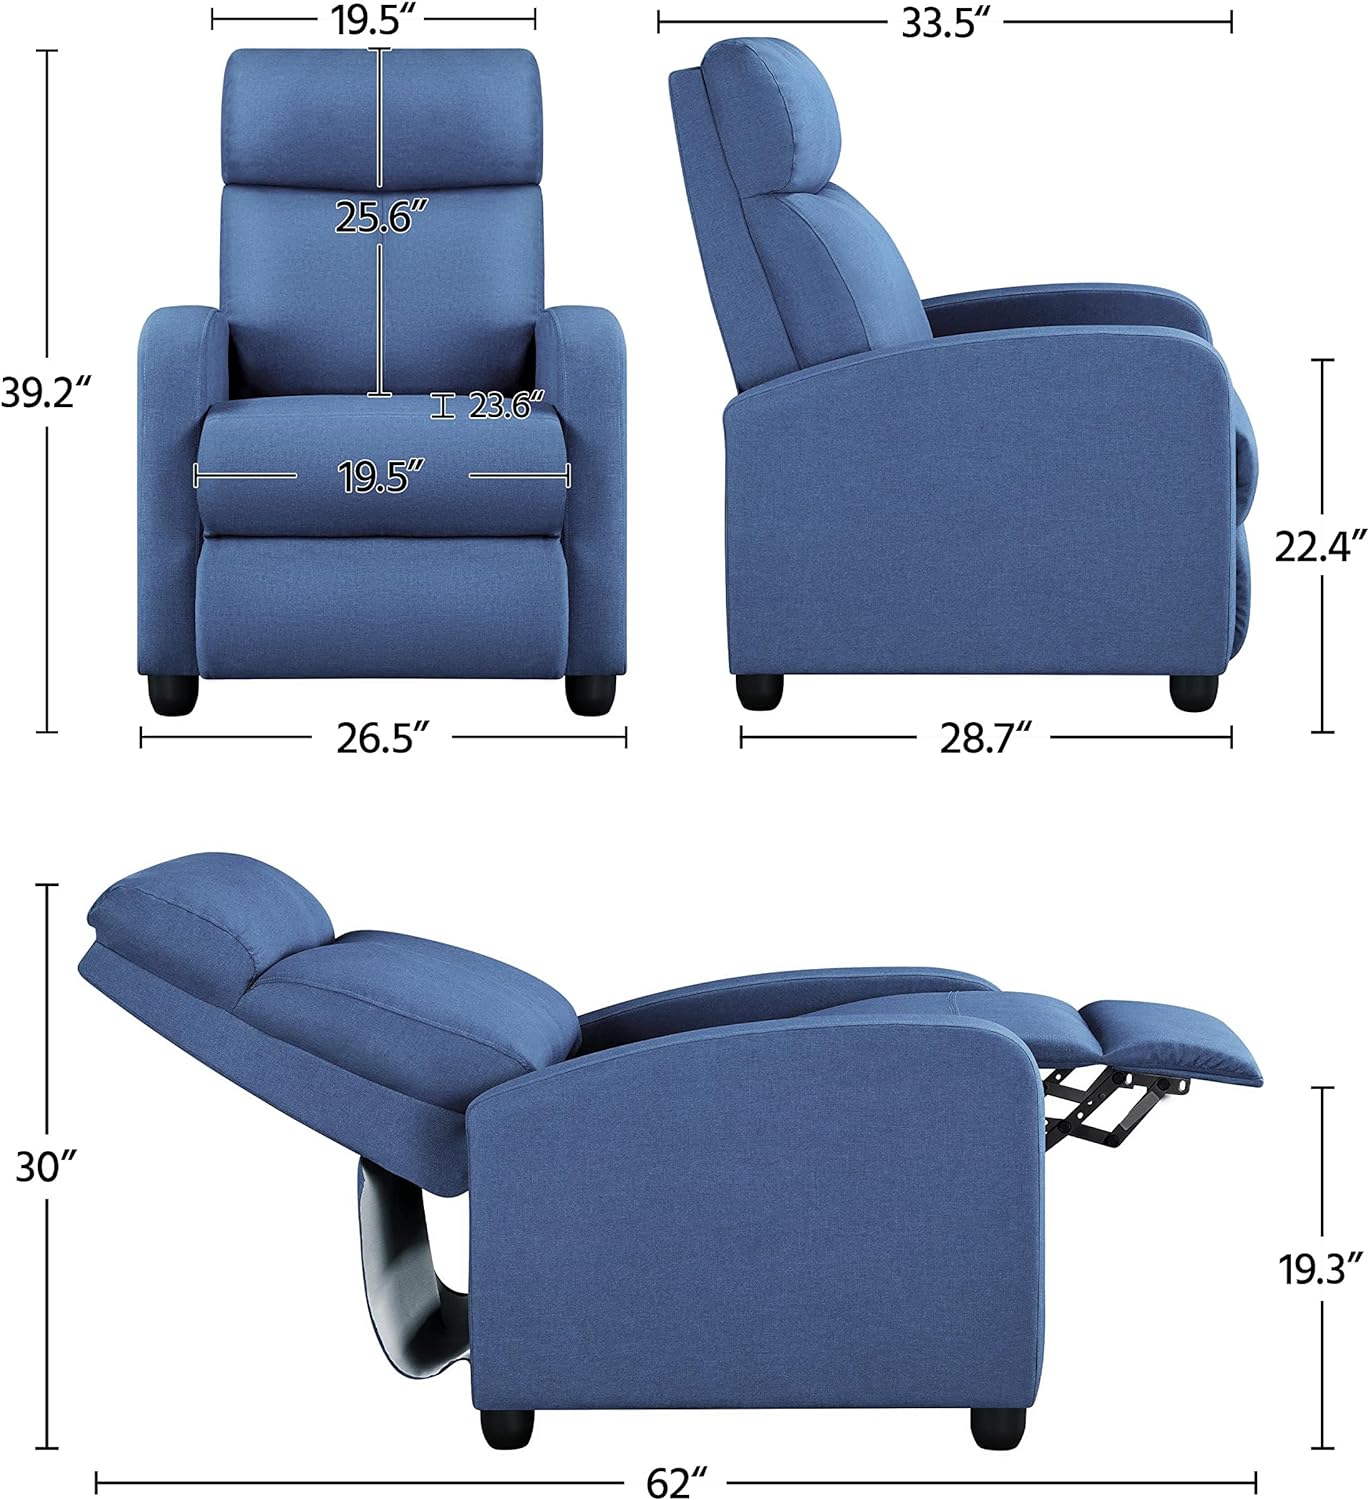 Fabric Recliner Chair Sofa Ergonomic Adjustable Single Sofa with Thicker Seat Cushion Modern Home Theater Seating for Living Room Light Blue